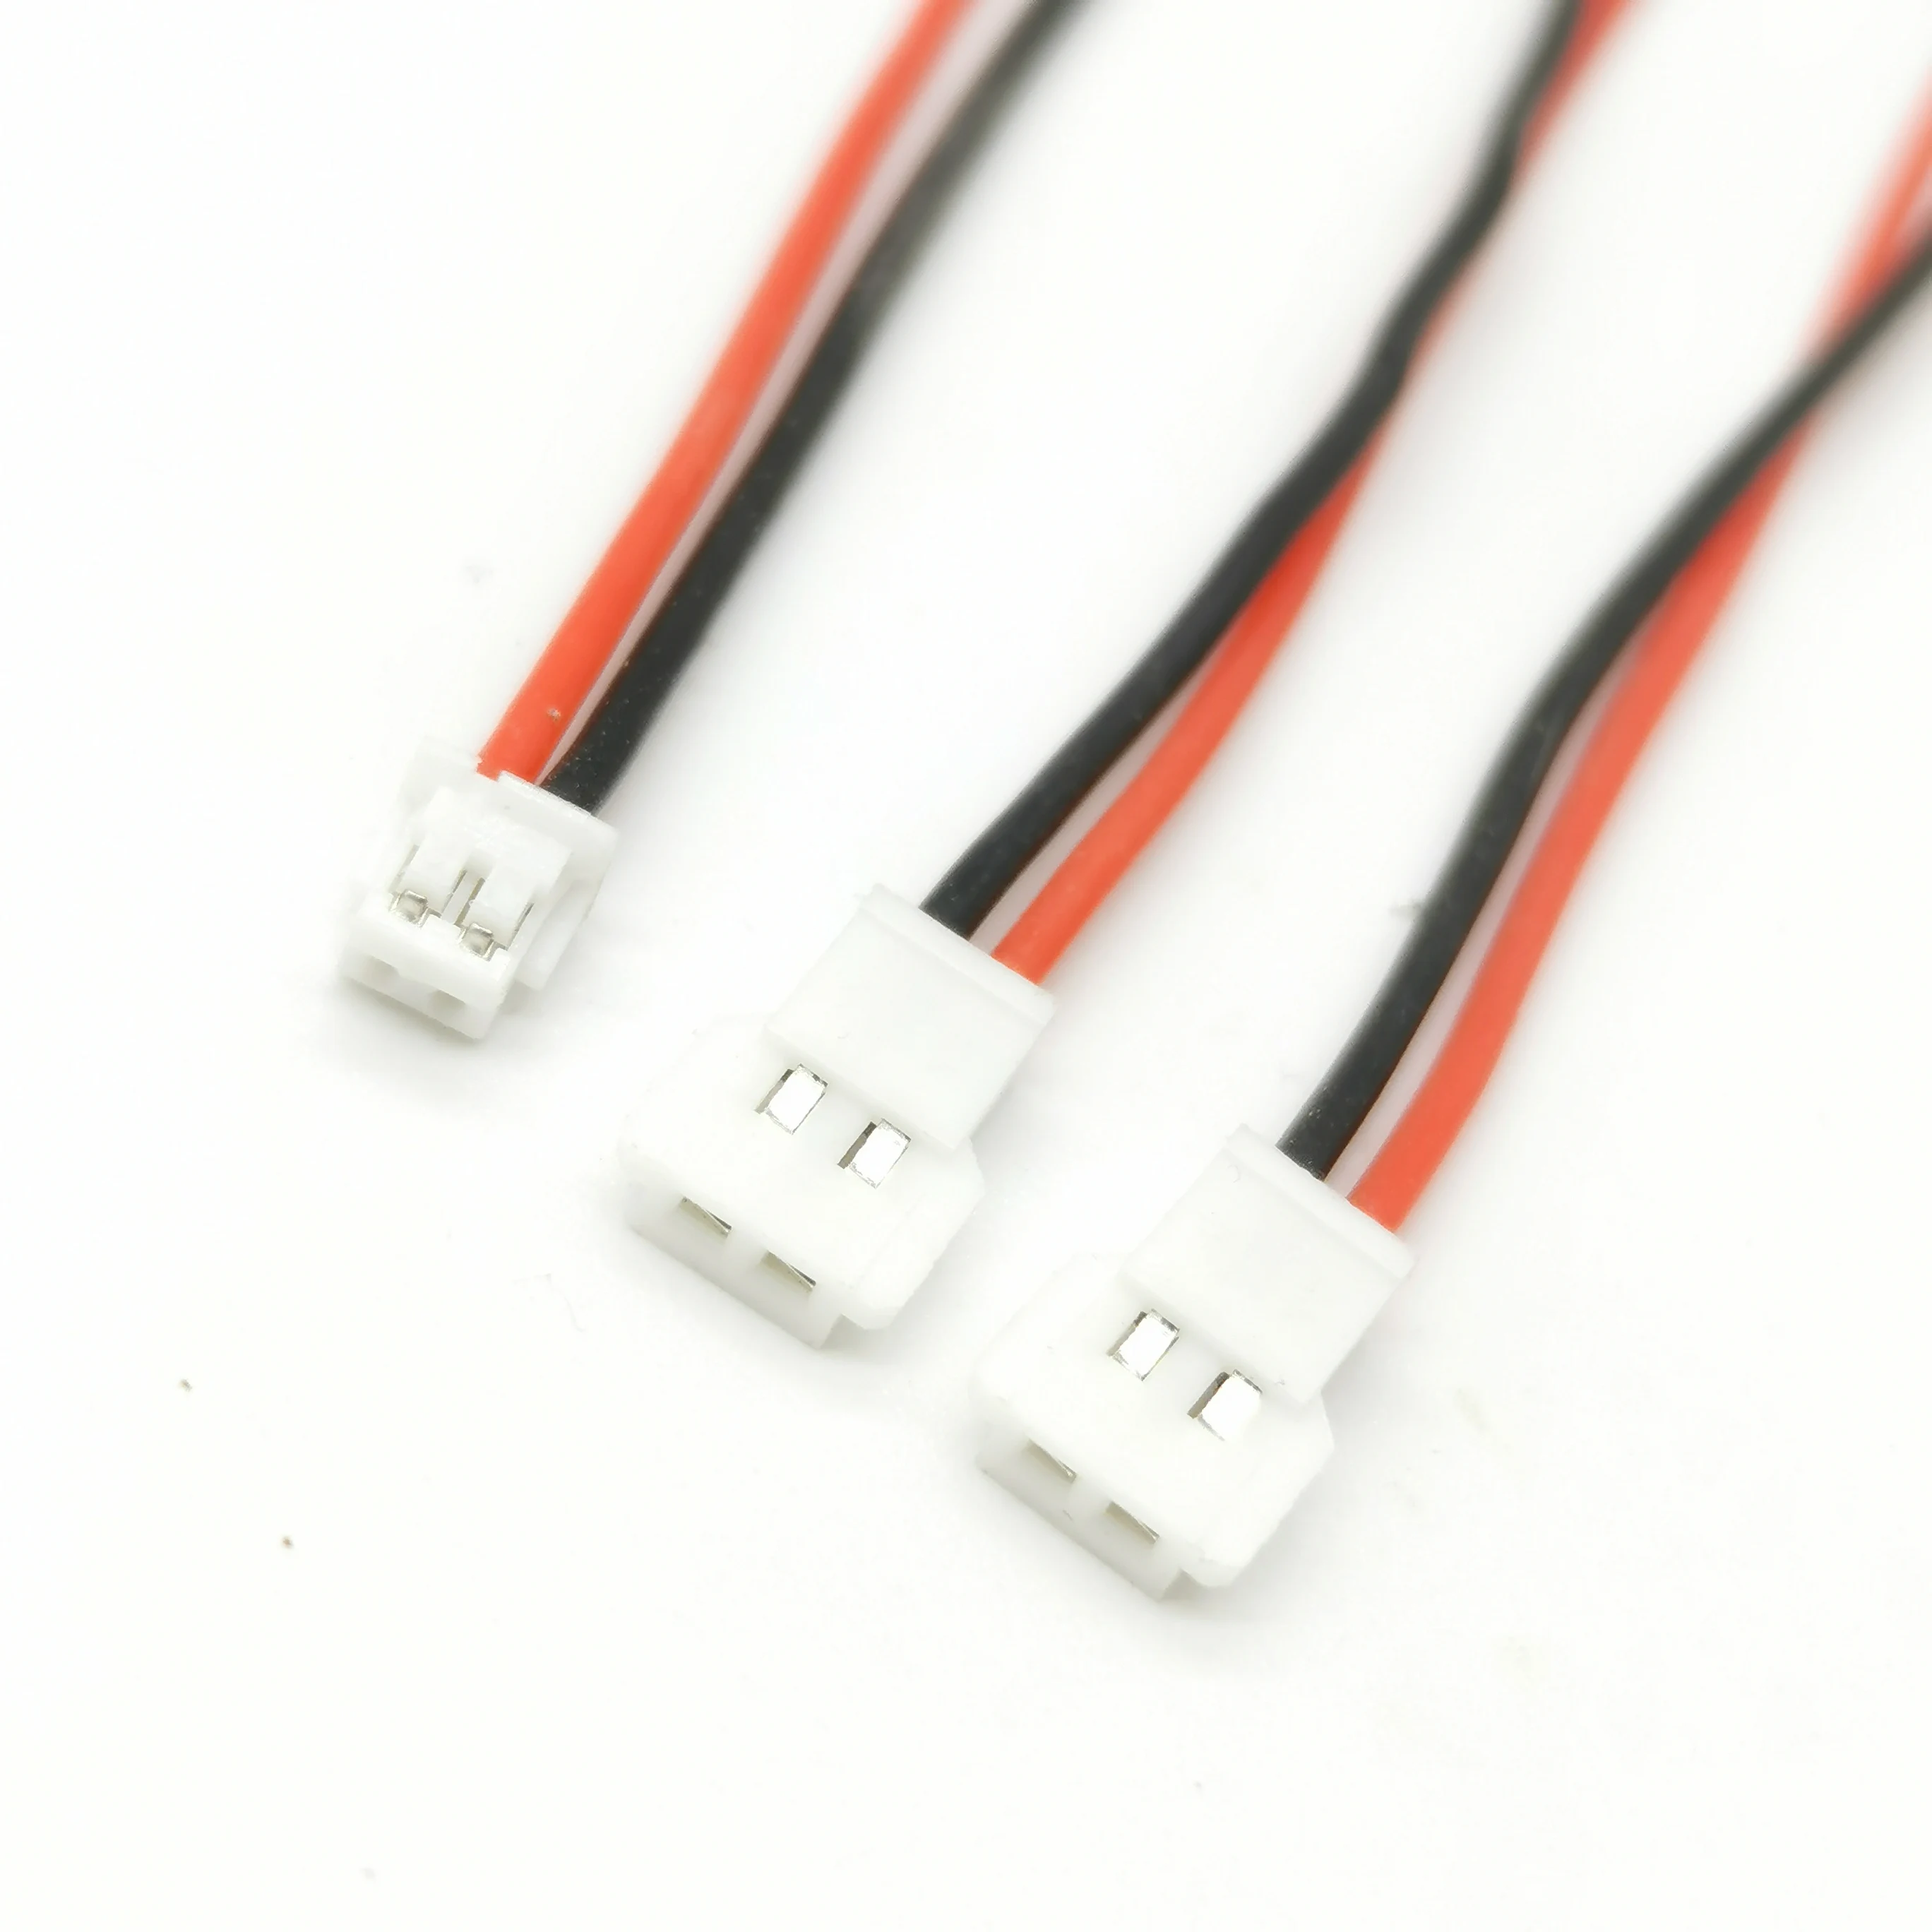 Battery plug connector adapter JST Female TO HX Molex 51005 Male Syma H31 RC toy 